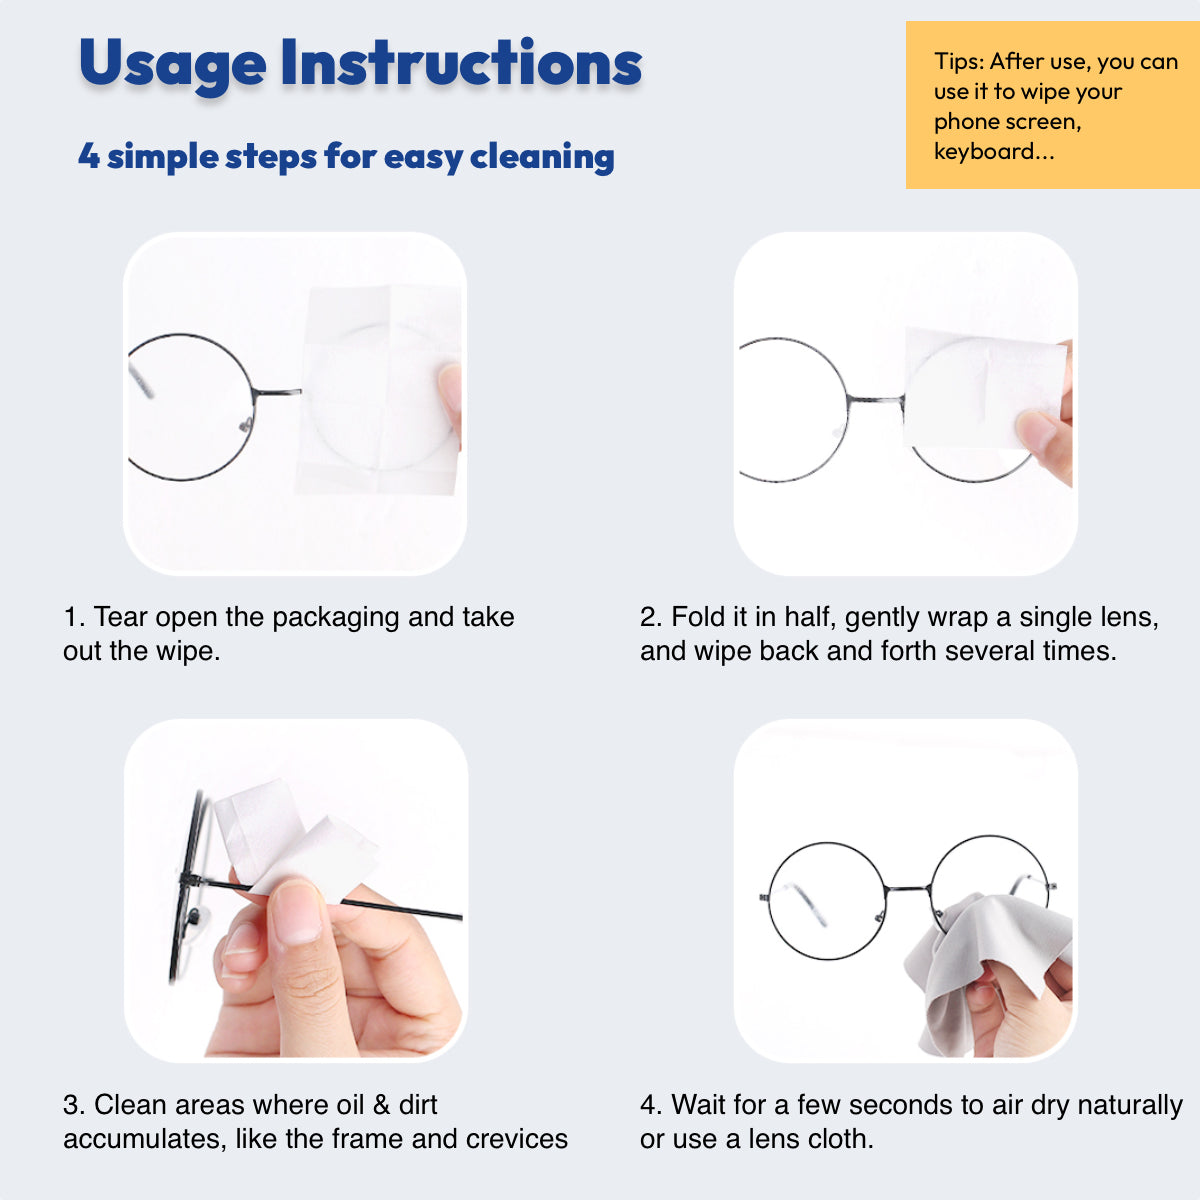 100Pcs Disposable Anti-Fog Lens Cleaning Wipes Pack Fog-Proof Cloth for Spectacle Glasses Camera Mobile Phone Screen